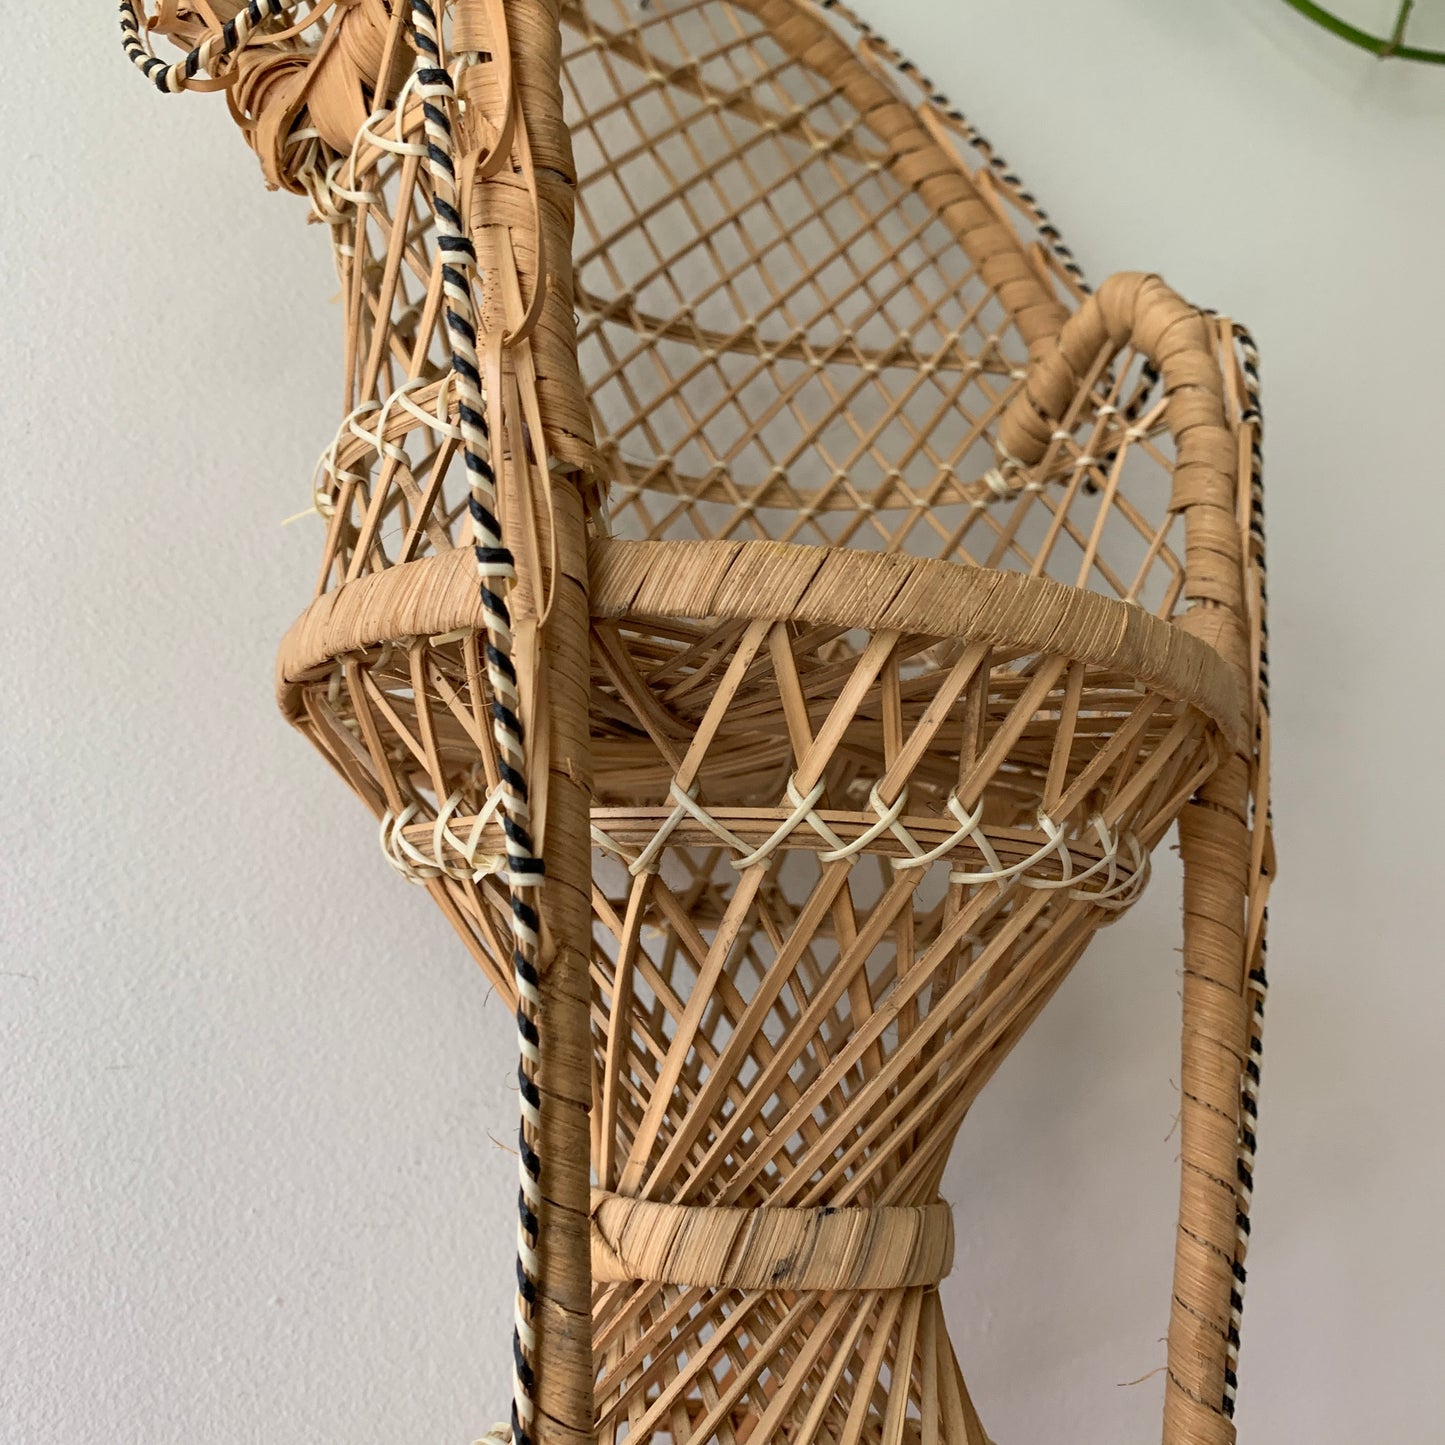 Vintage Mid-Size Wicker Peacock Plant or Doll Chair 0002